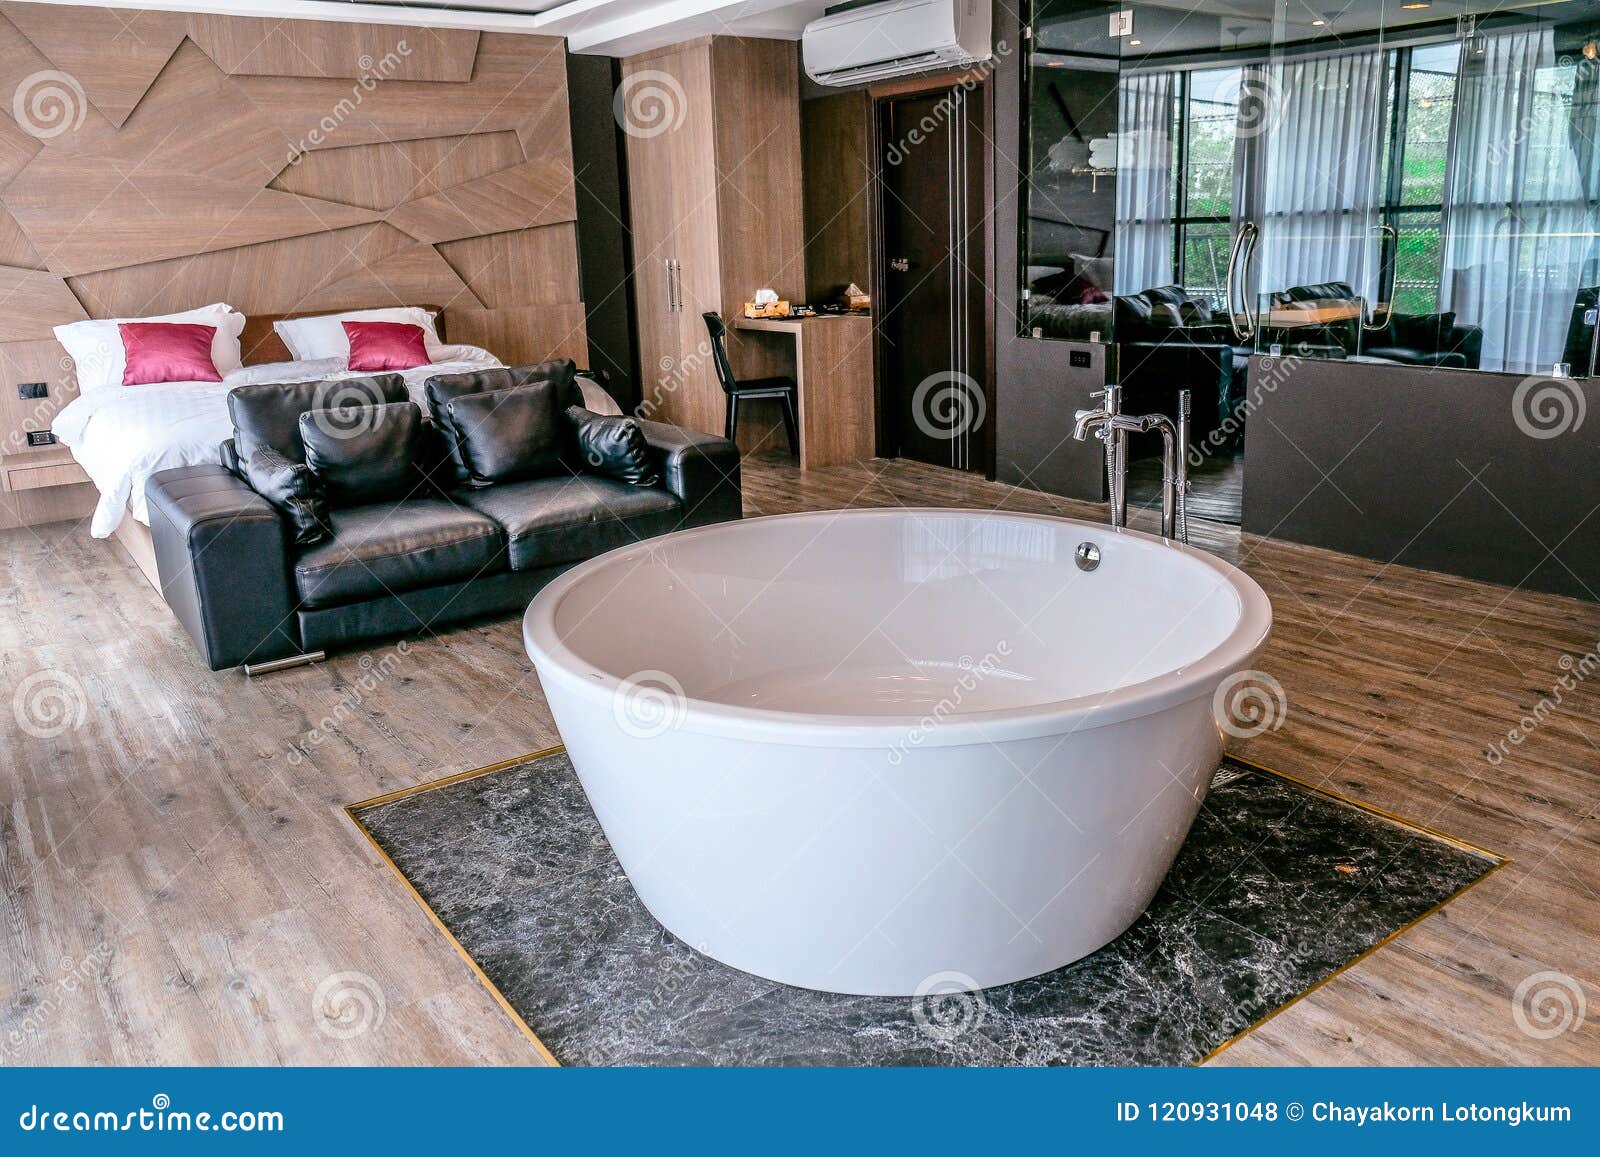 Private Guest House Including Jacuzzi and Hot Tub is Ready with Shinny Sink  Tap Very Luxury Editorial Stock Photo - Image of bathroom, luxurious:  120931048